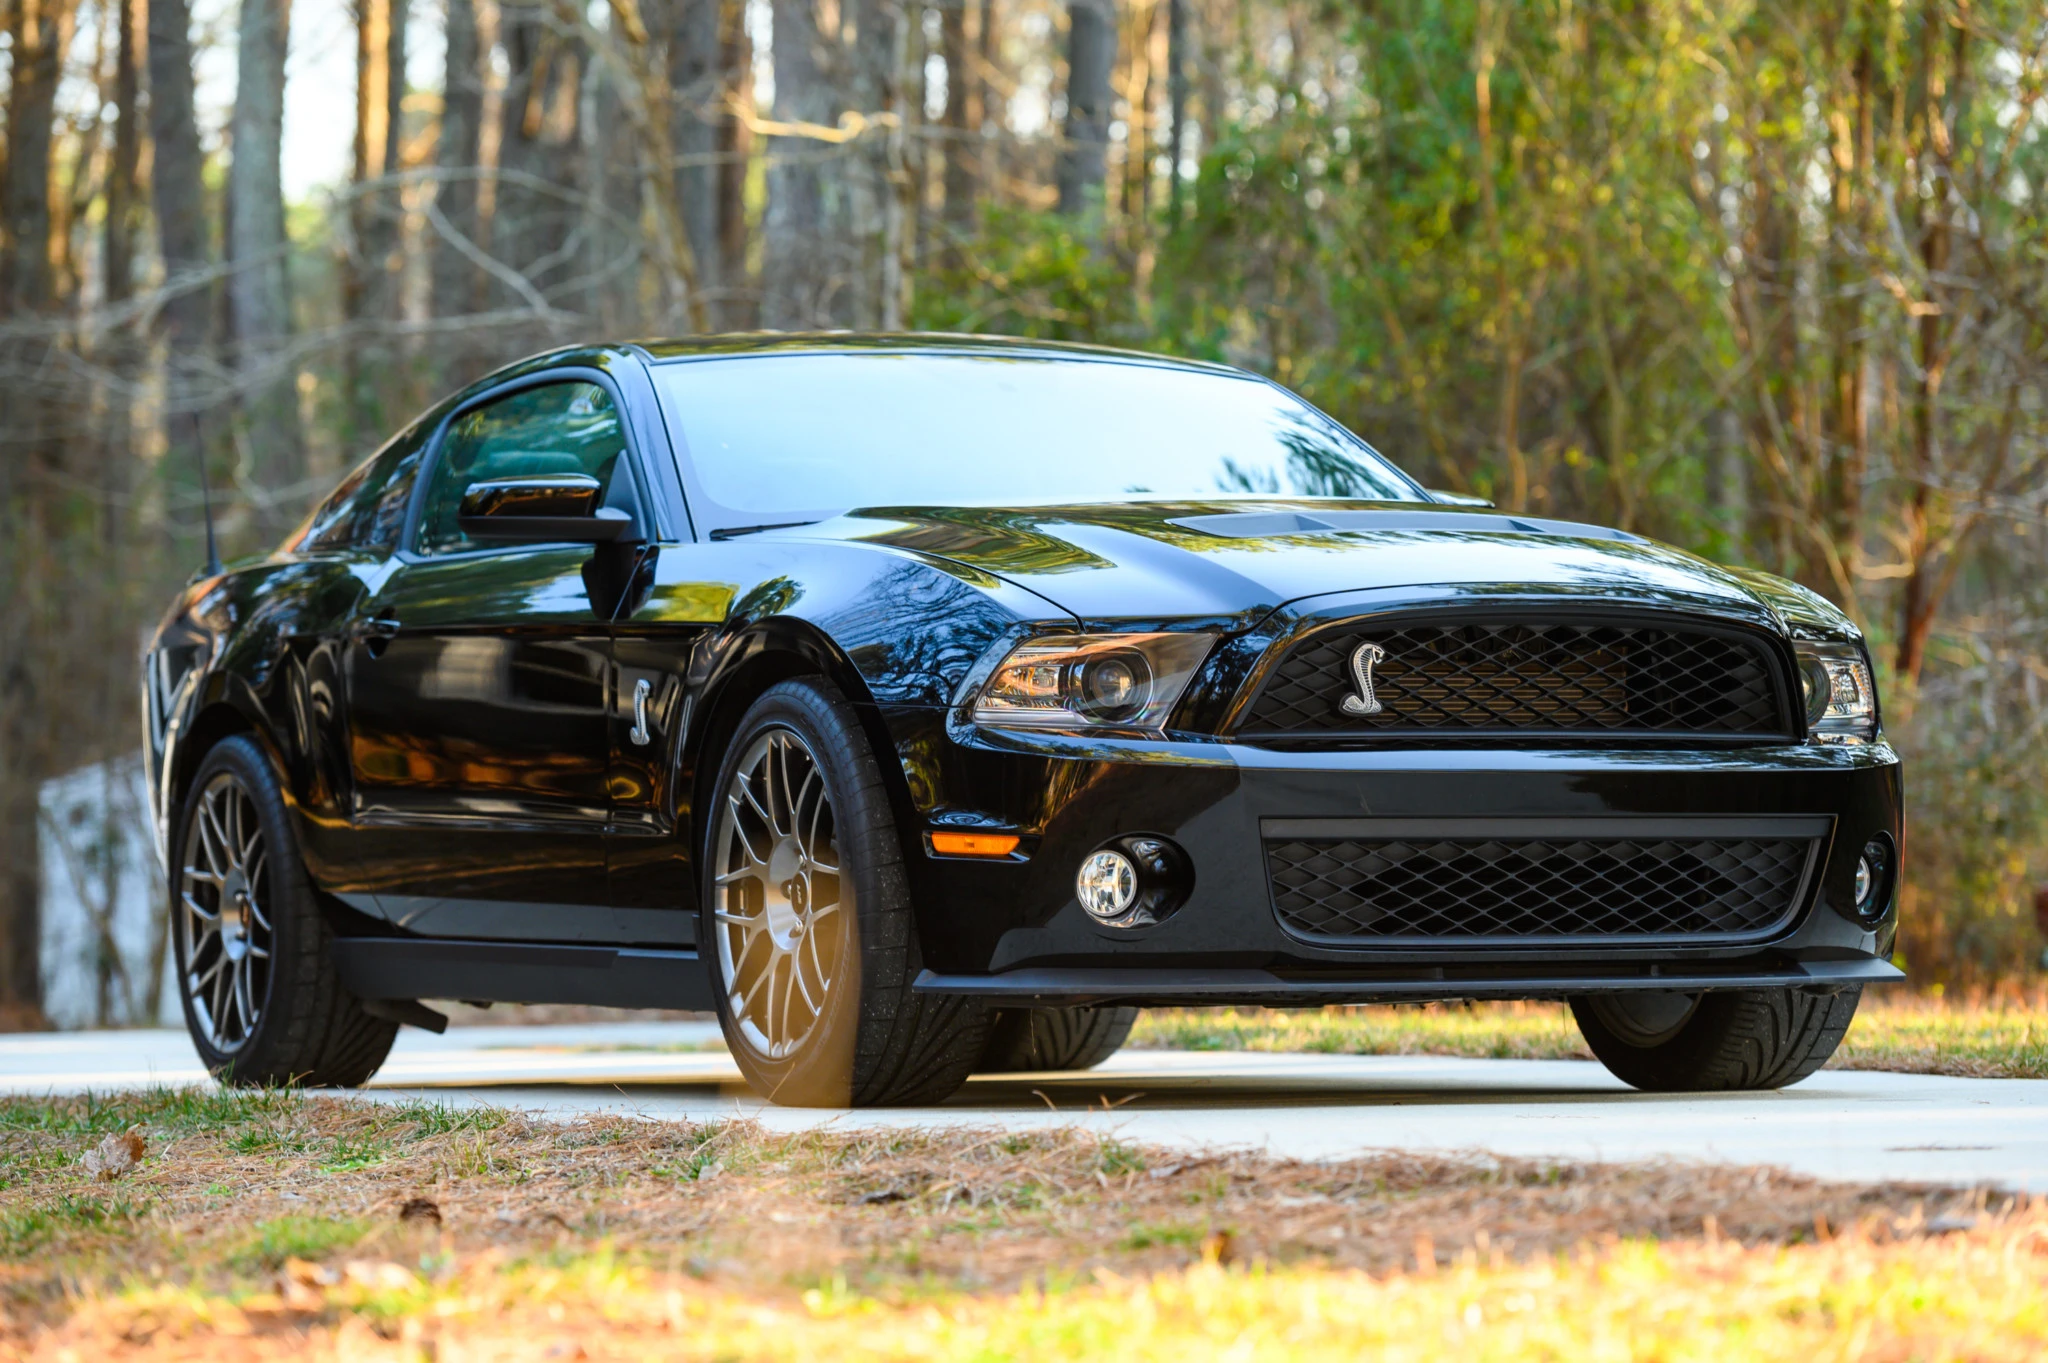 Mustang Of The Day: 2011 Ford Mustang Shelby GT500